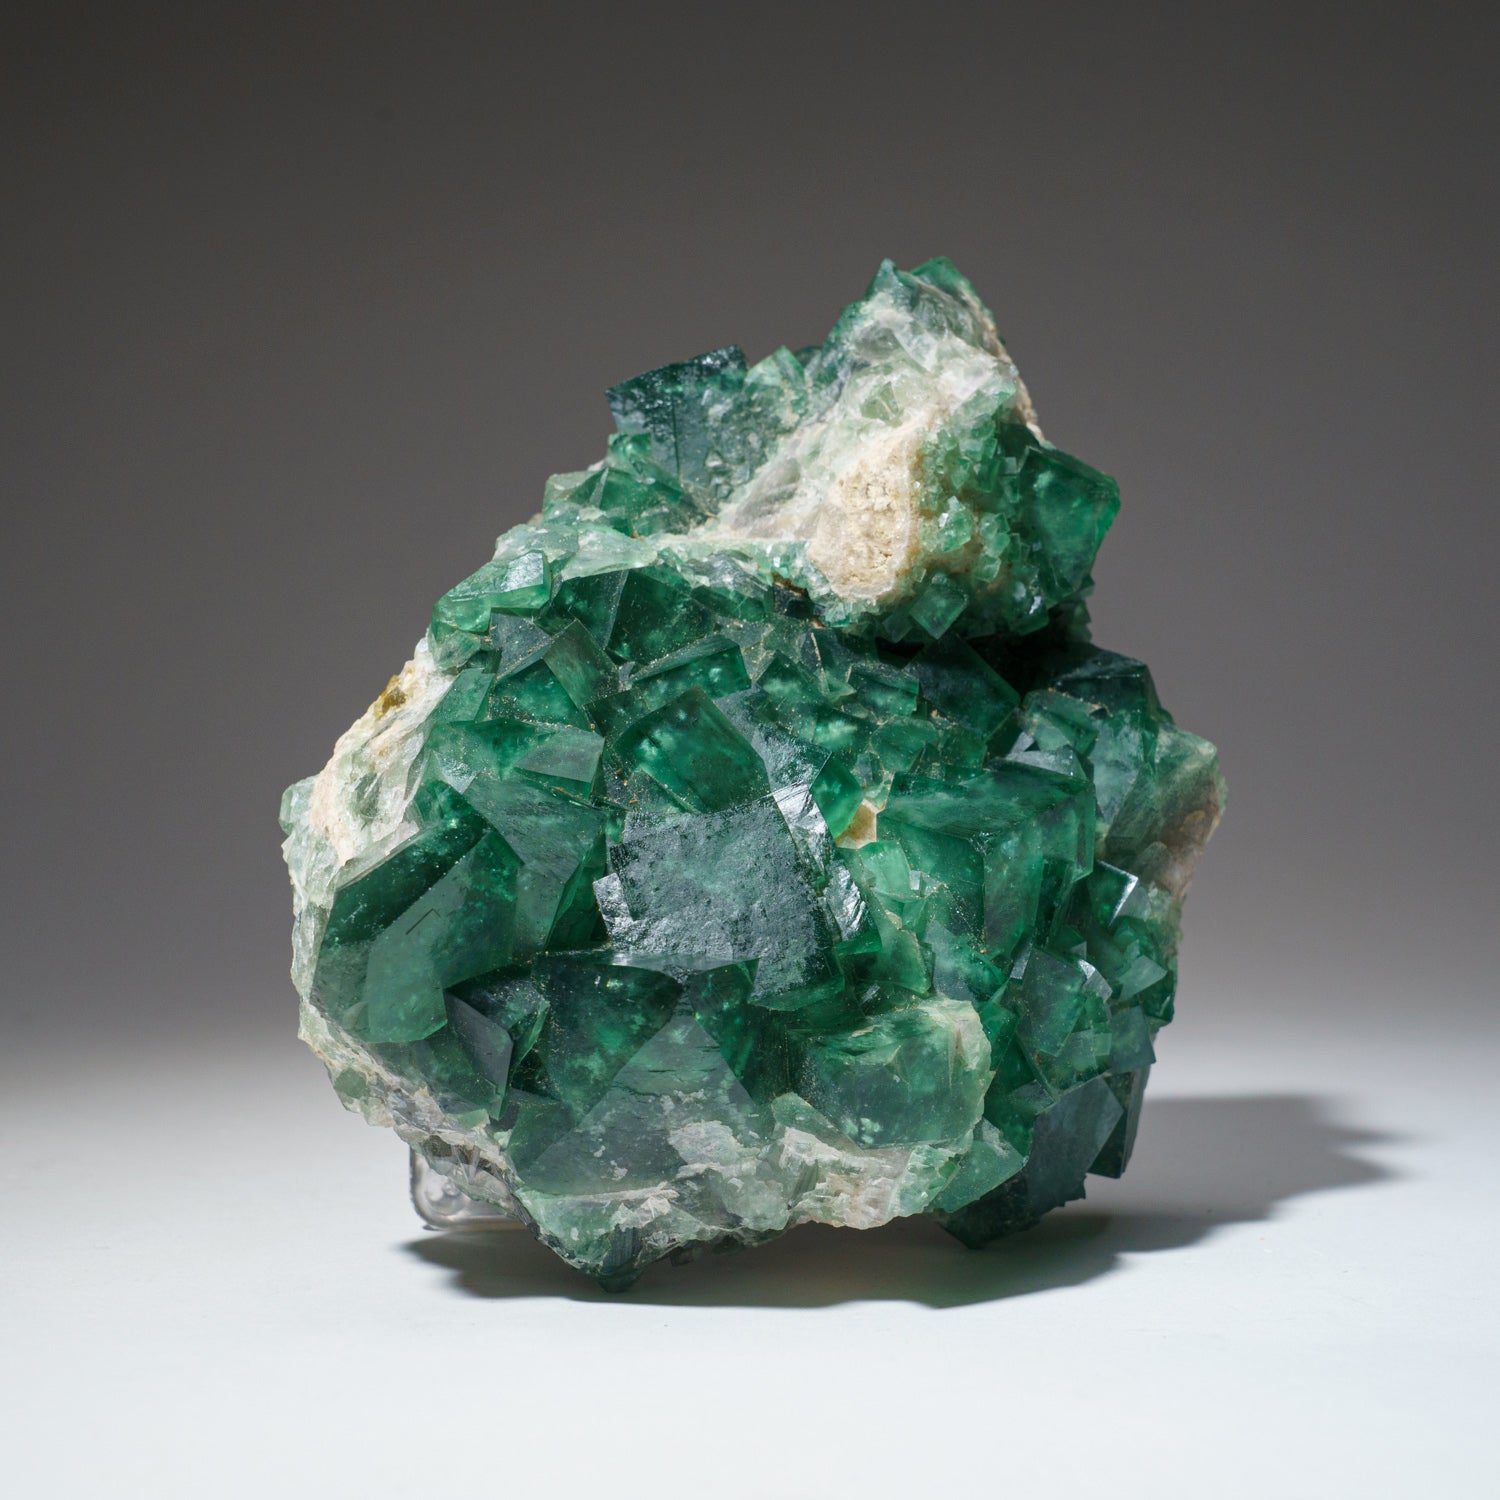 Genuine Green Fluorite from Namibia (4.5 lbs)